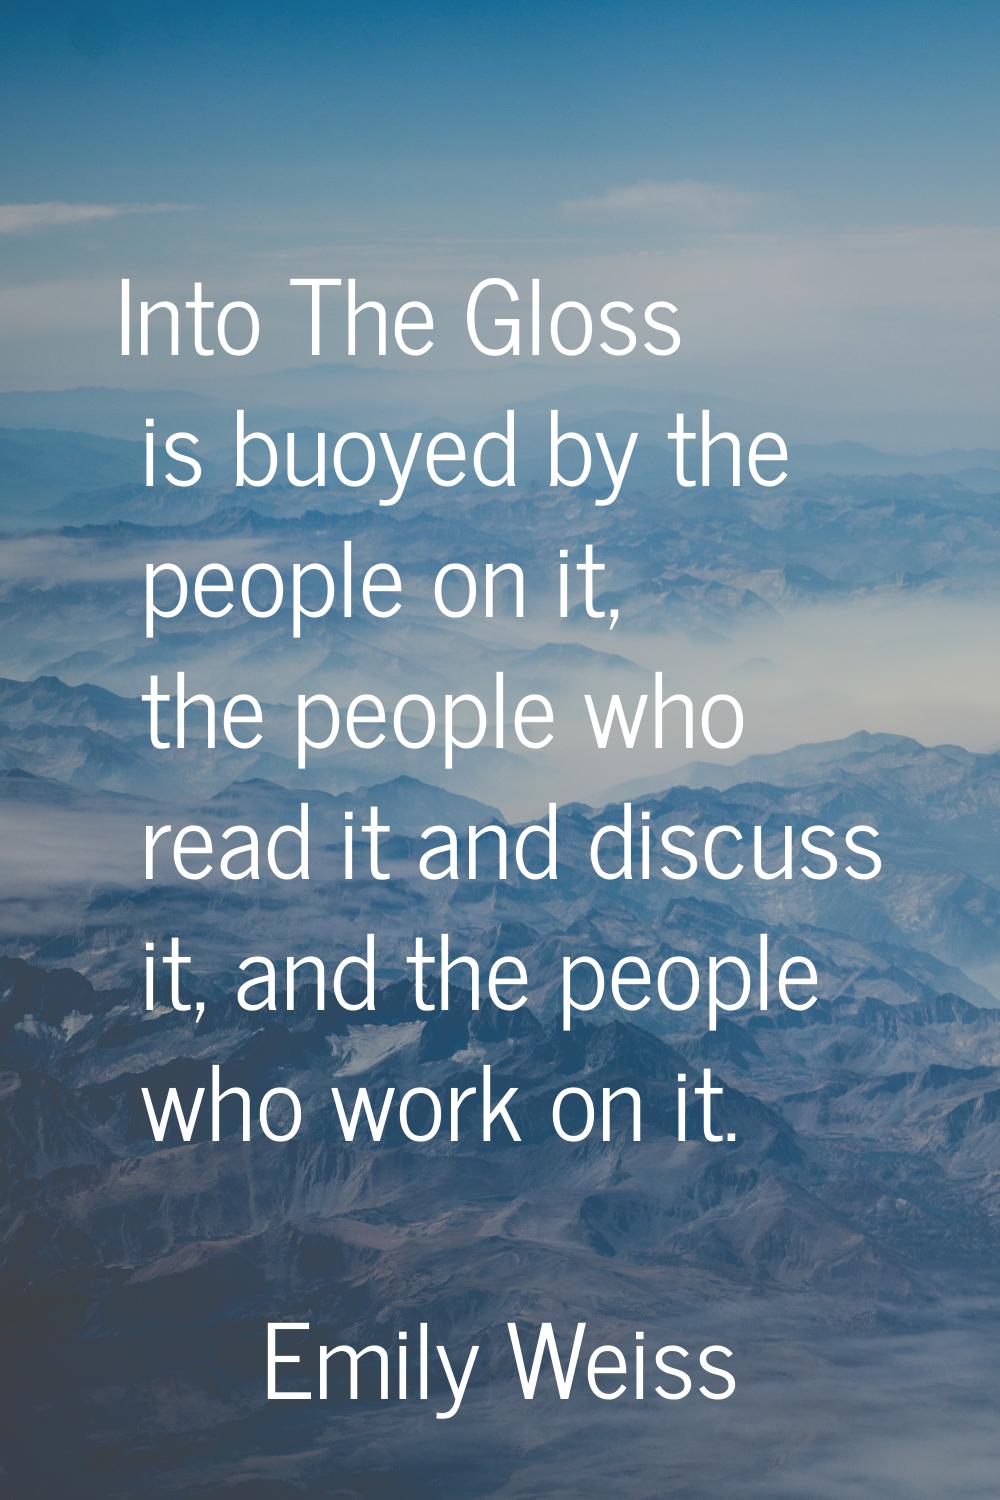 Into The Gloss is buoyed by the people on it, the people who read it and discuss it, and the people